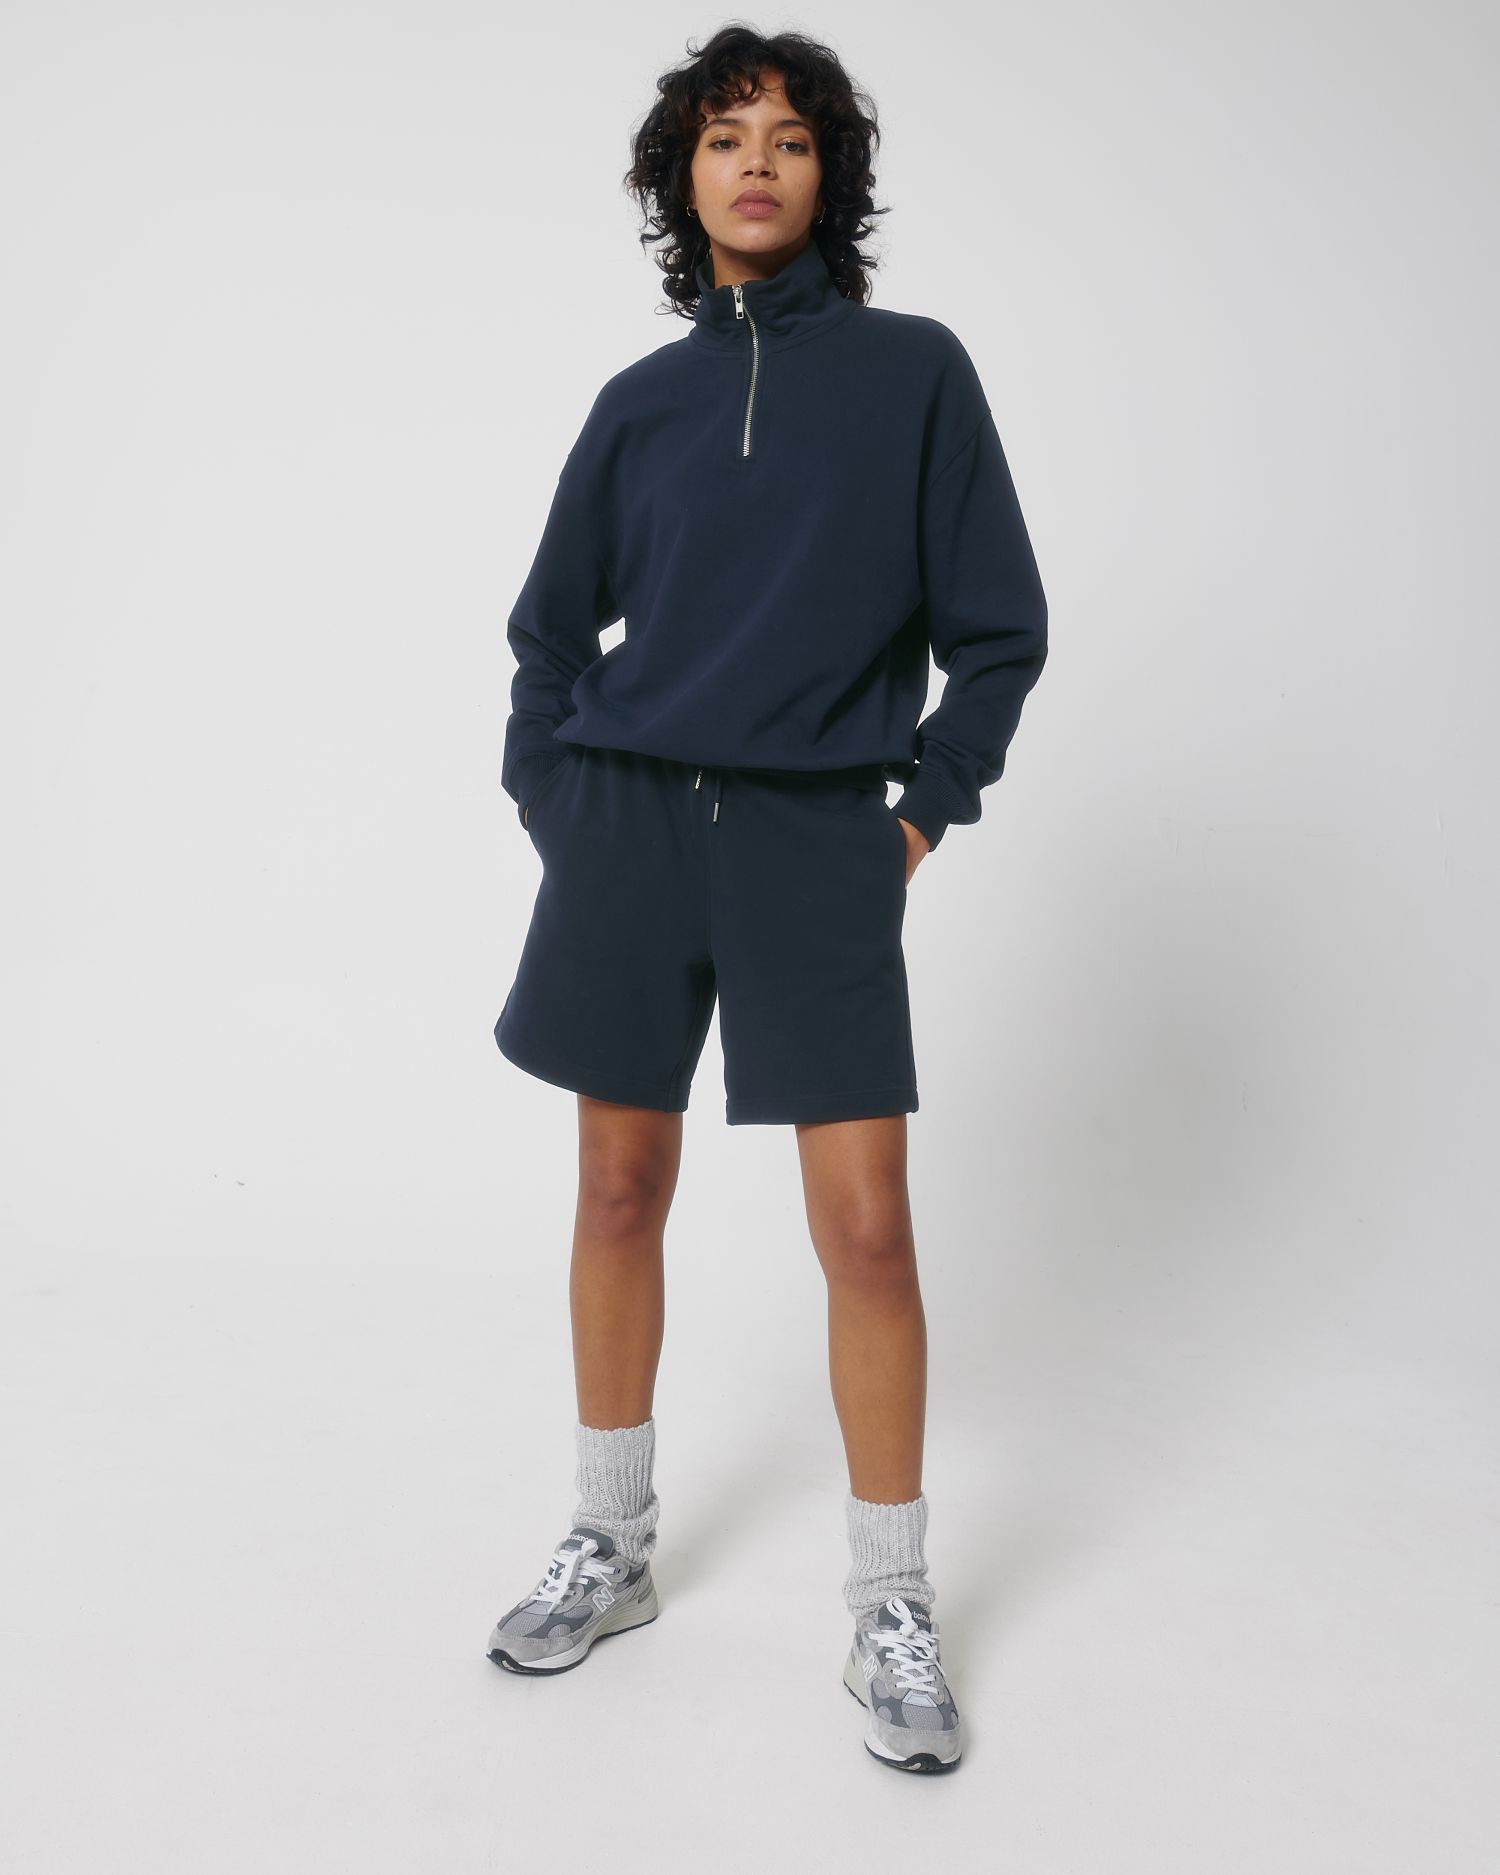 Crew neck sweatshirts Miller Dry in Farbe French Navy